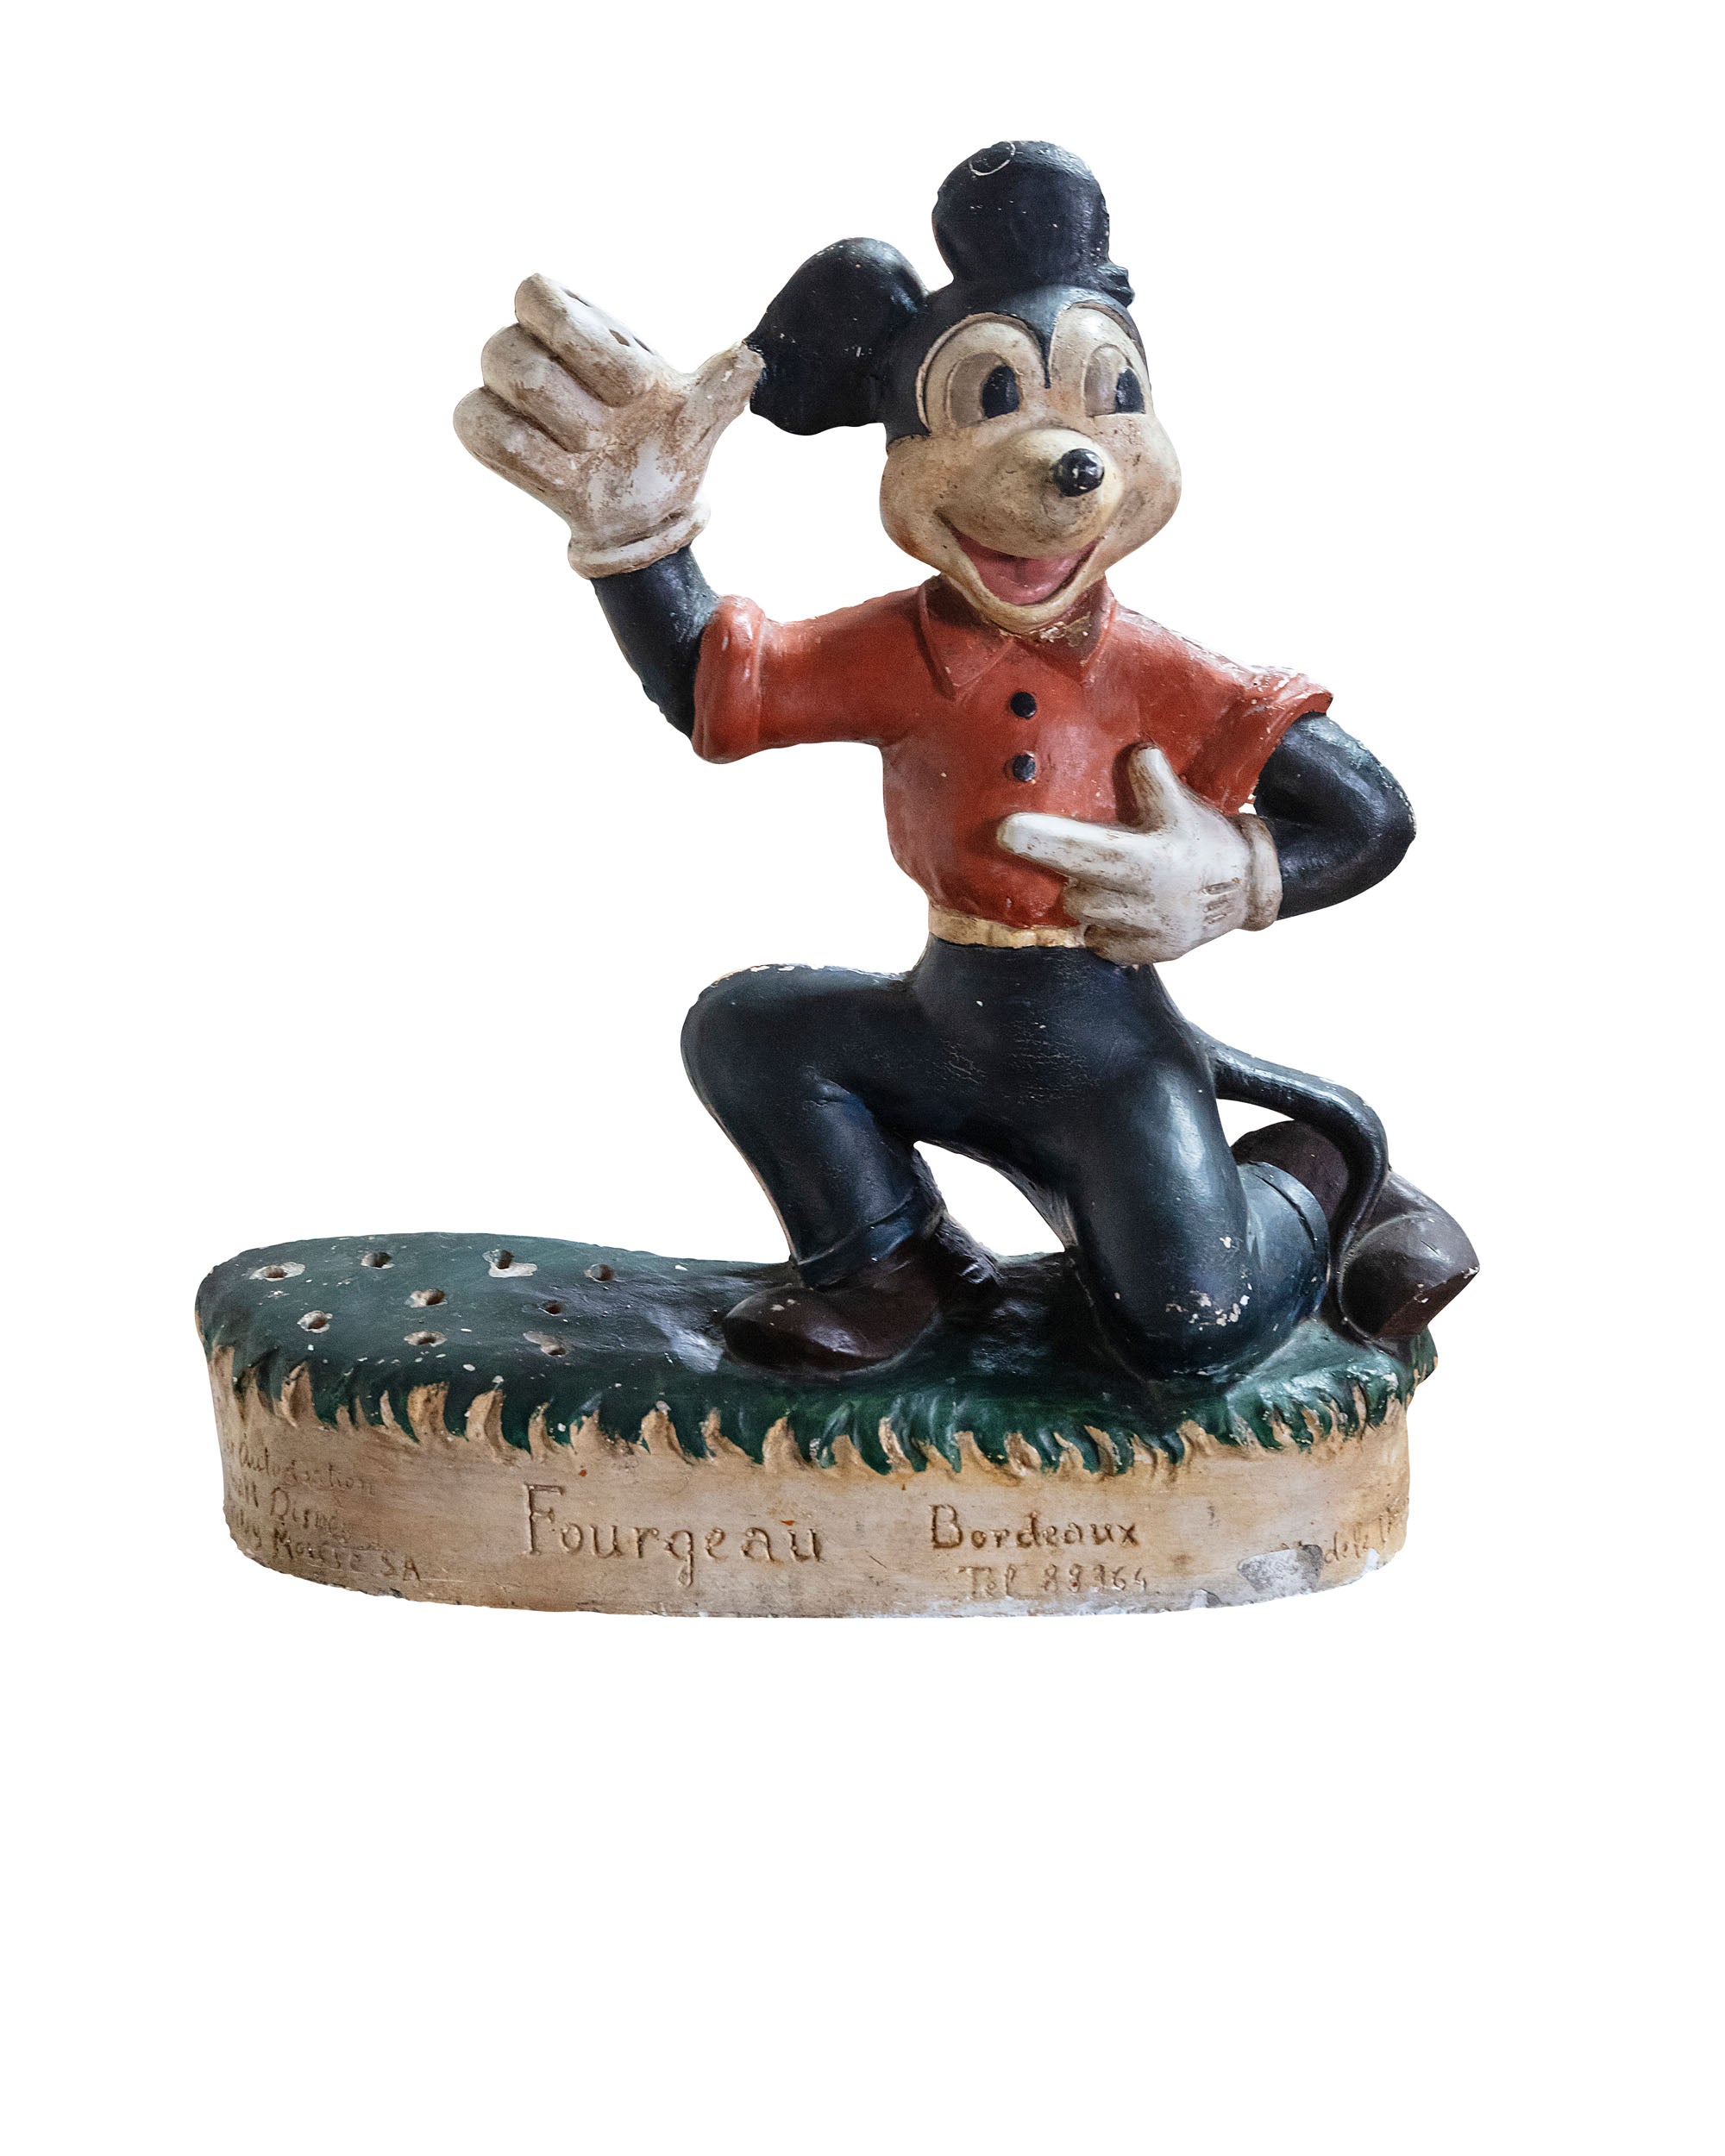 Mickey Mouse statue made of plaster to display lollipops. Year 1930/1940